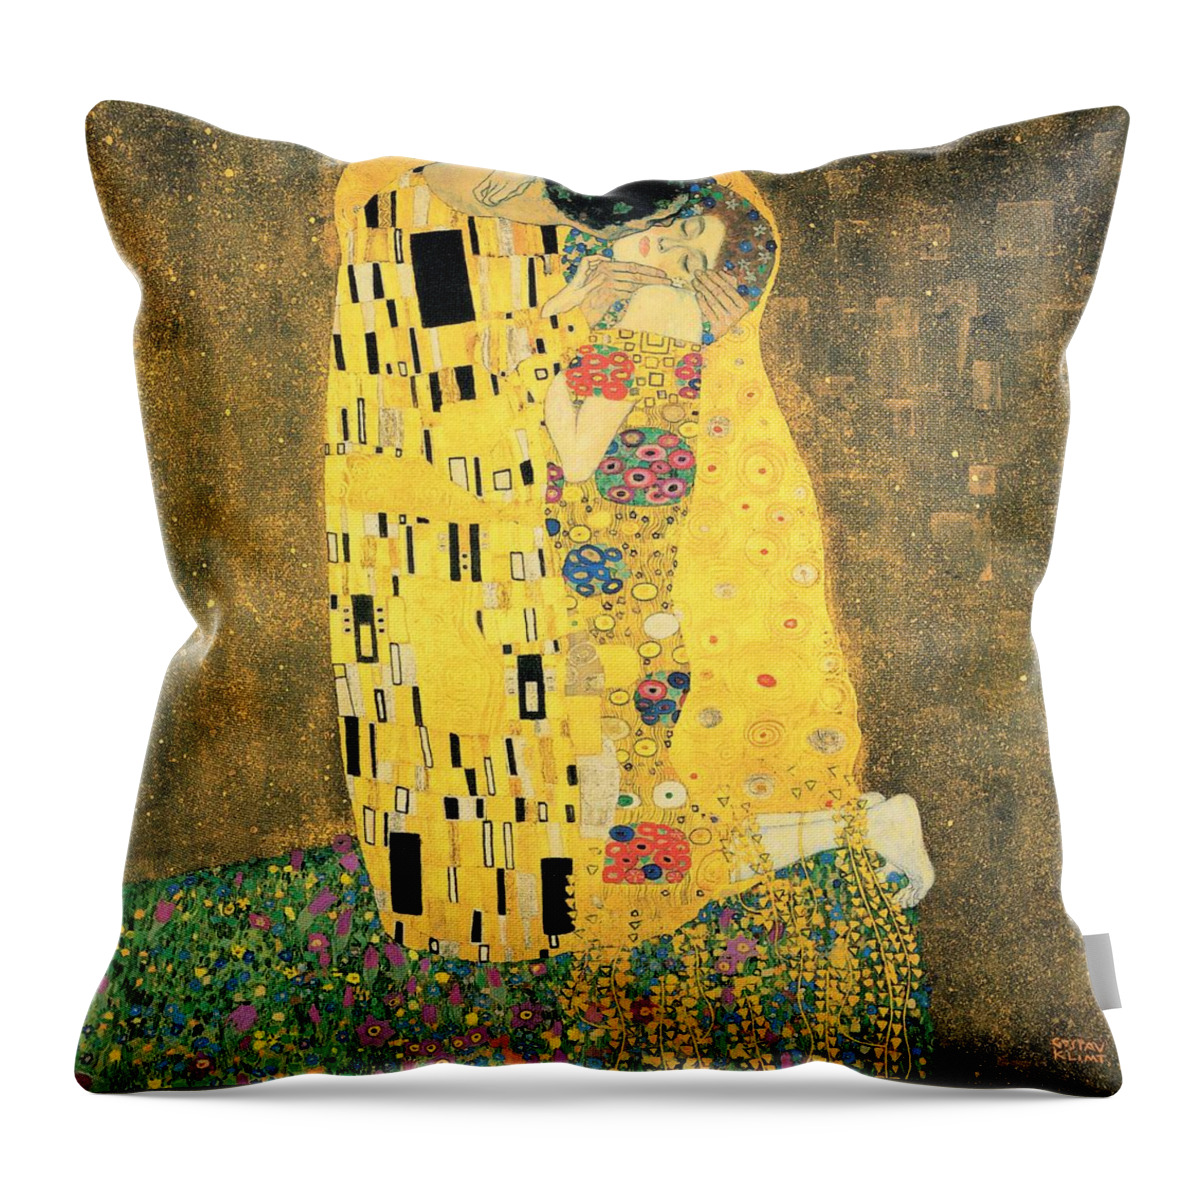 The Kiss Art Print Throw Pillow featuring the painting The Kiss #19 by Gustav Klimt